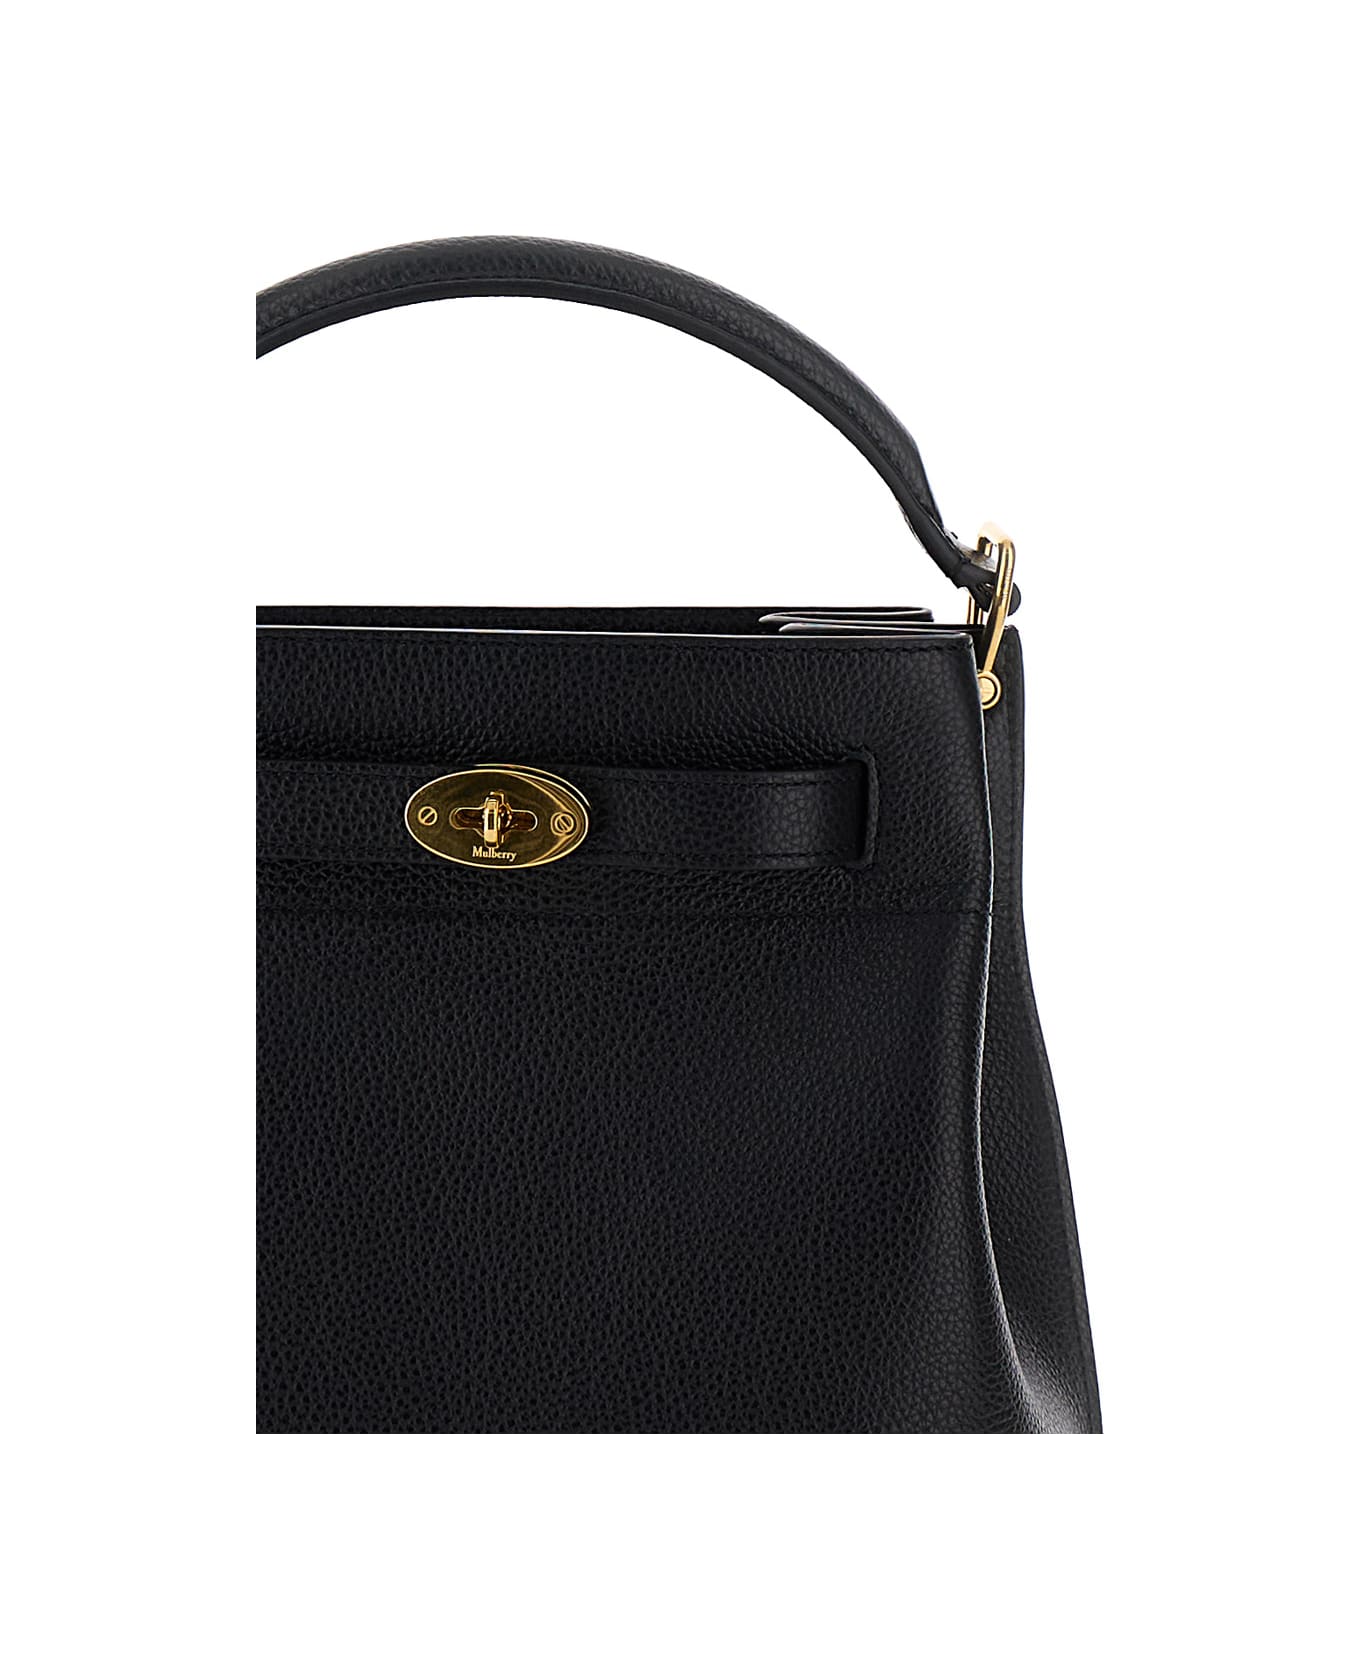 Mulberry 'small Islington' Black Bucket Bag With Twist Lock Closure In Hammered Leather Woman - Black トートバッグ